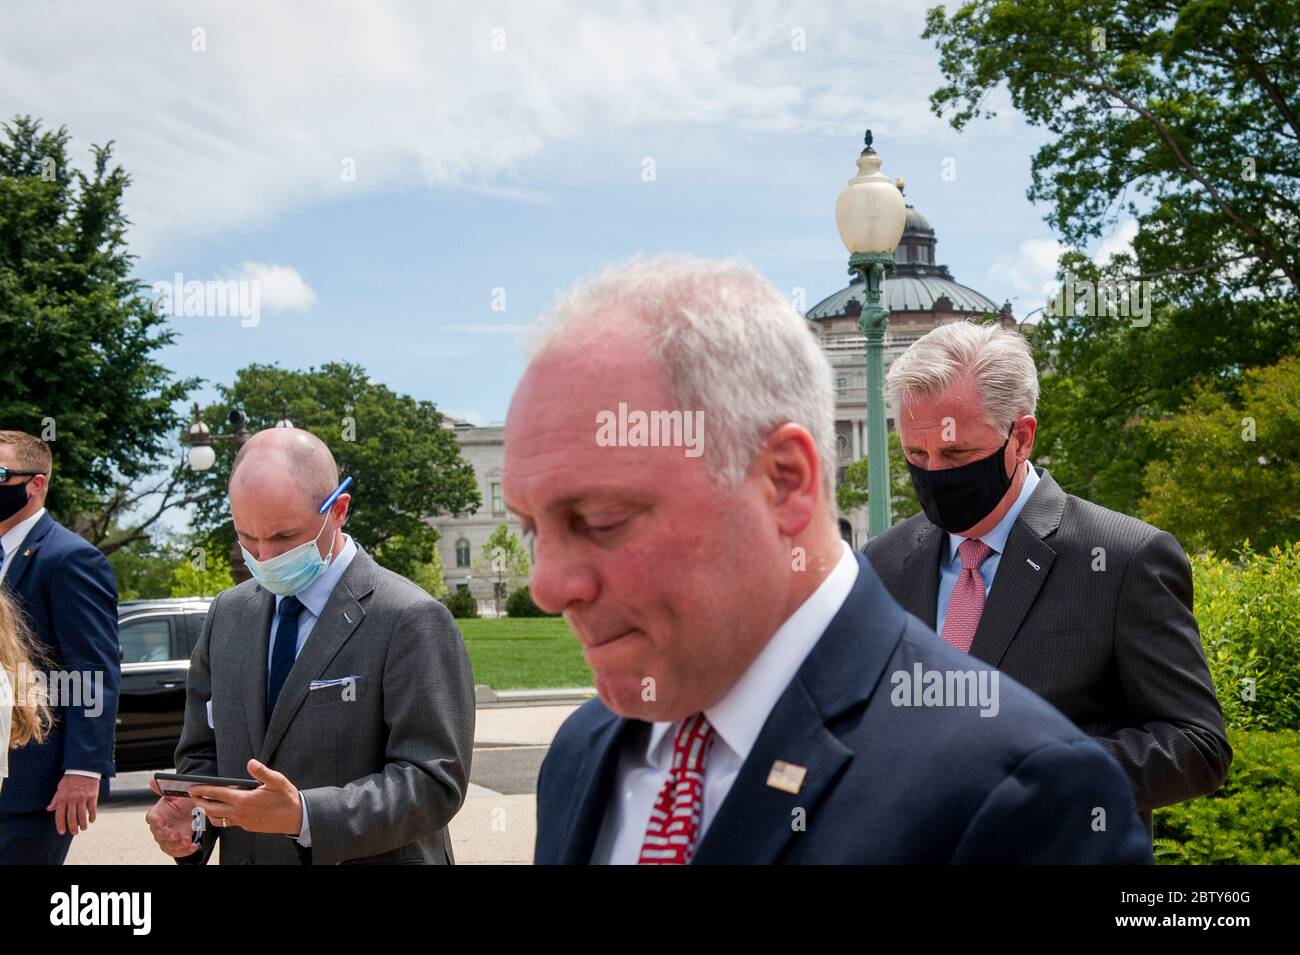 House Minority Leader Rep. Kevin McCarthy (R-Calif.) wears his face mask following a media availability with House Minority Whip Rep. Steve Scalise (R-LA), House GOP Conference Chairwoman Liz Cheney (R-WY) and others, to announce that Republican leaders have filed a lawsuit against House Speaker Nancy Pelosi and congressional officials in an effort to block the House of Representatives from using a proxy voting system to allow for remote voting during the coronavirus pandemic, outside of the U.S. Capitol in Washington, DC., Wednesday, May 27, 2020. Credit: Rod Lamkey / CNP /MediaPunch Stock Photo